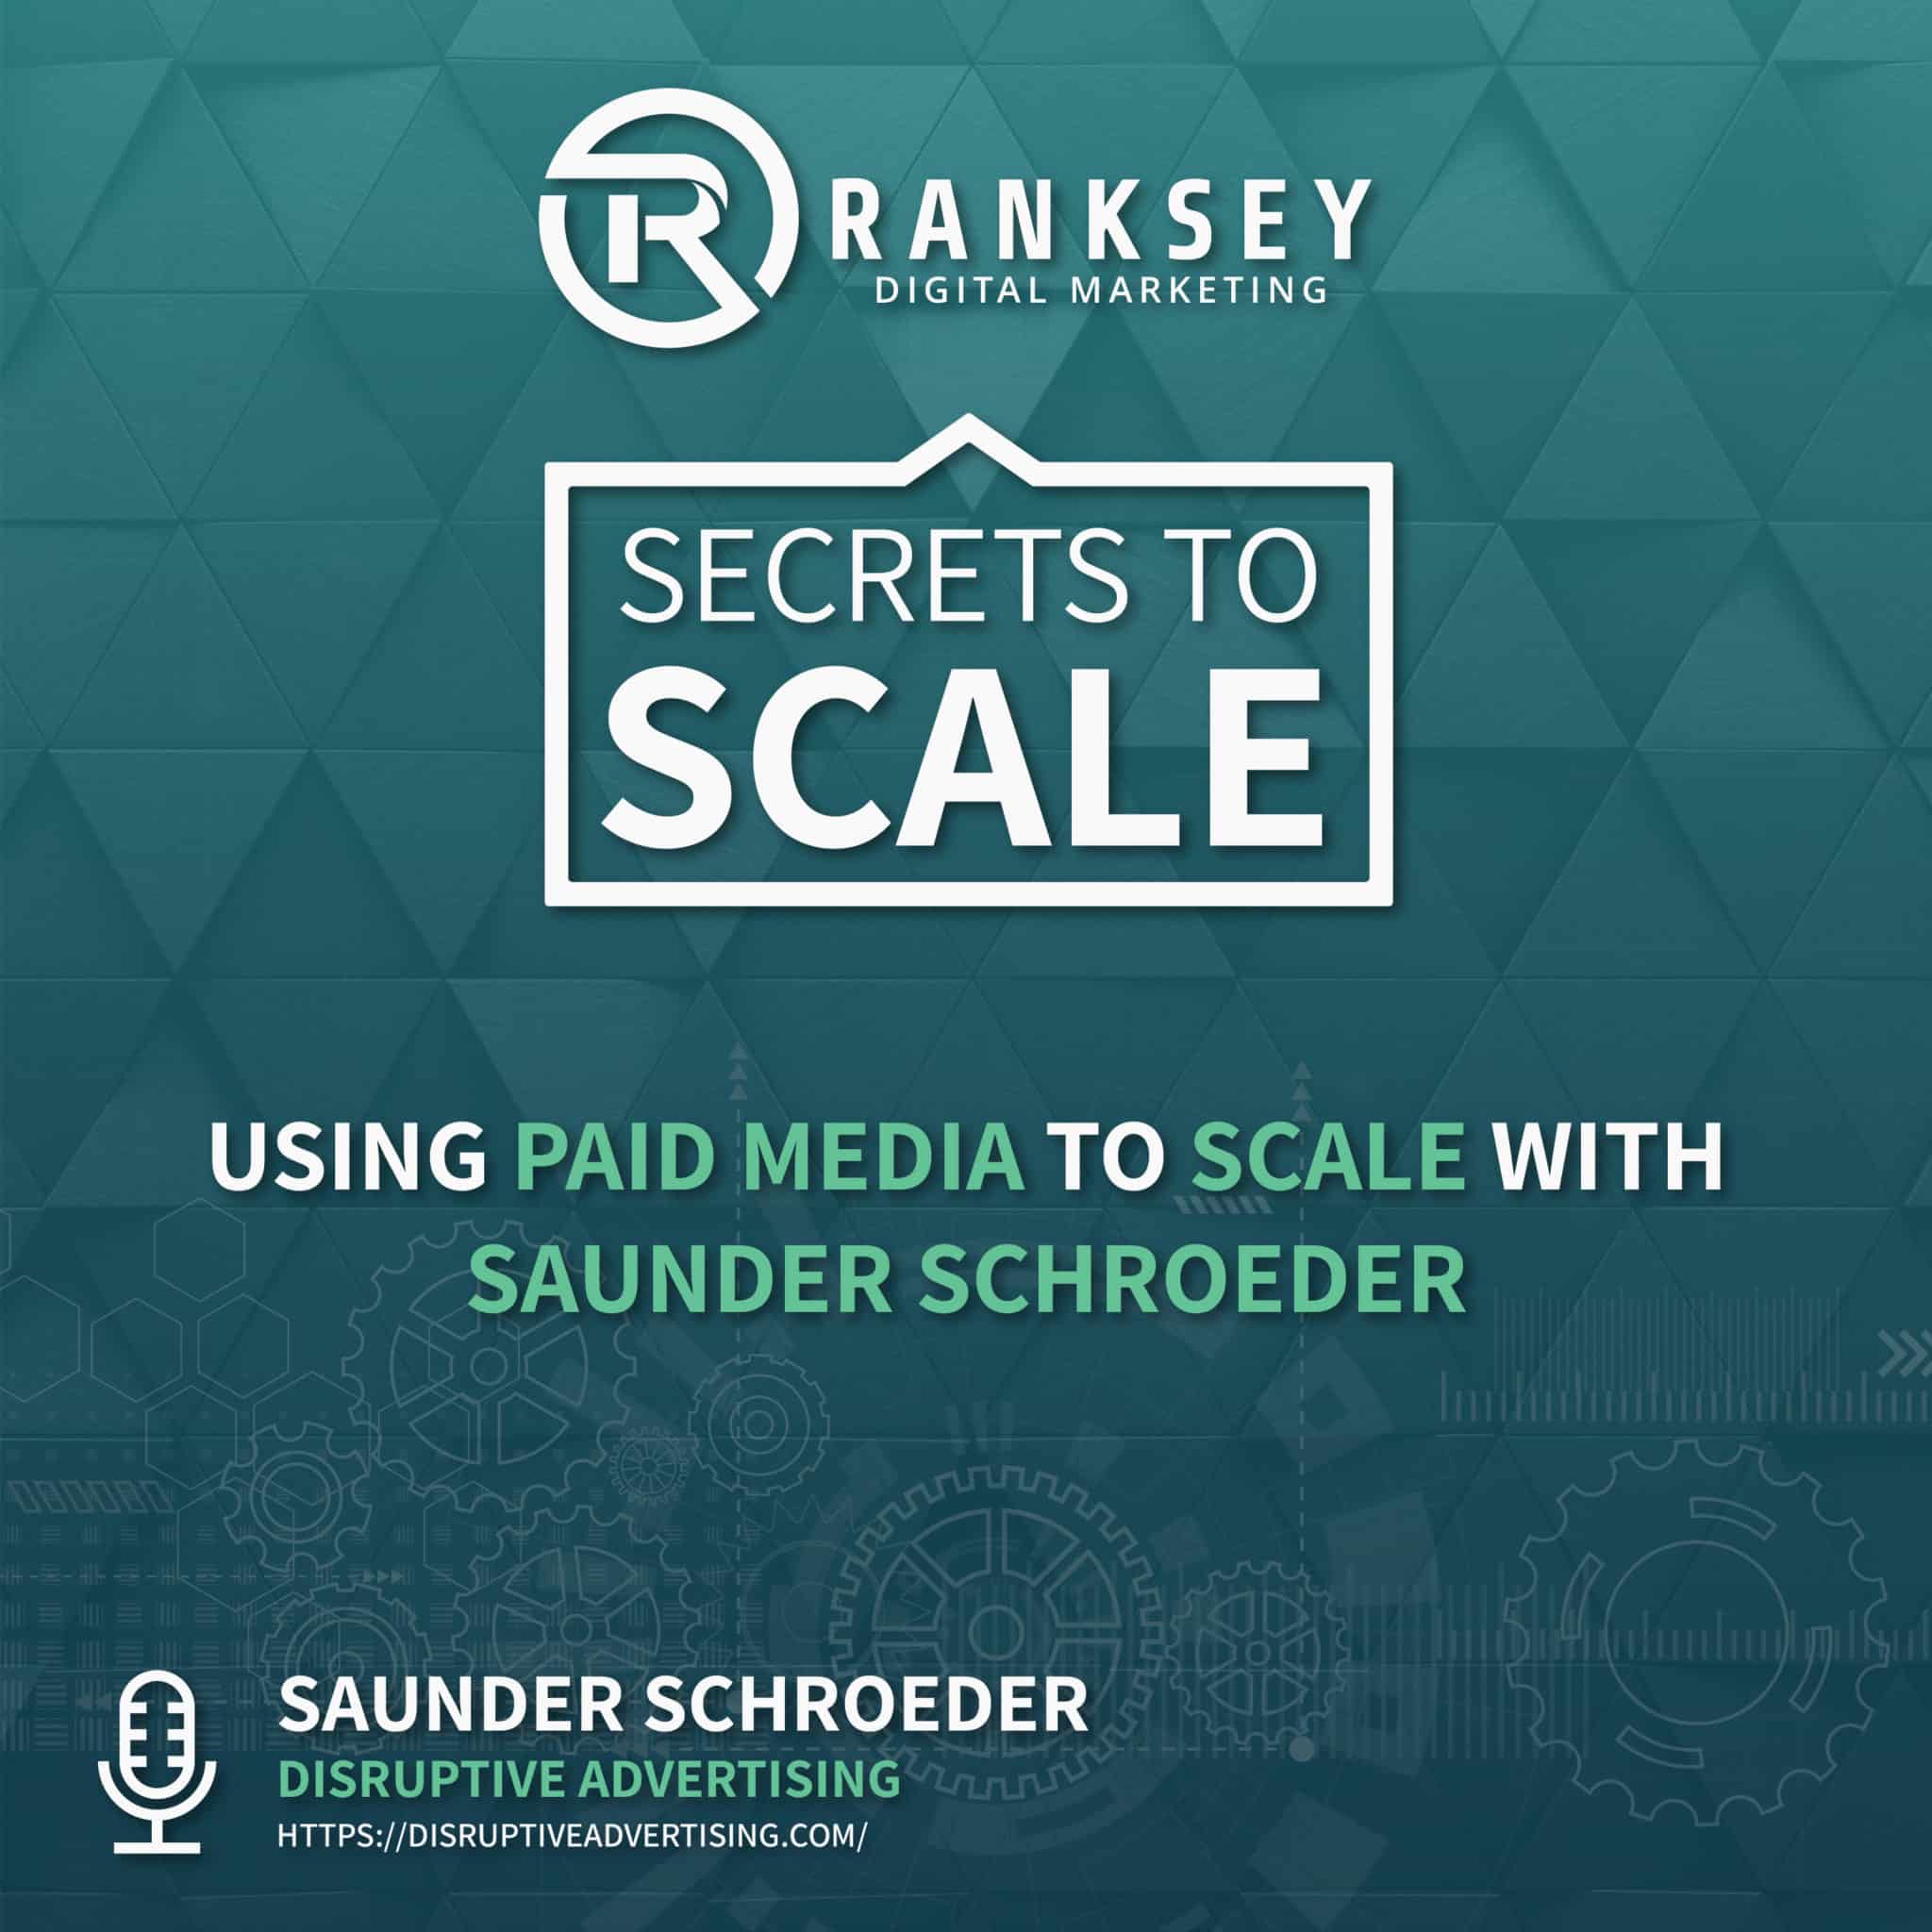 063 - Using Paid Media To Scale With Saunder Schroeder